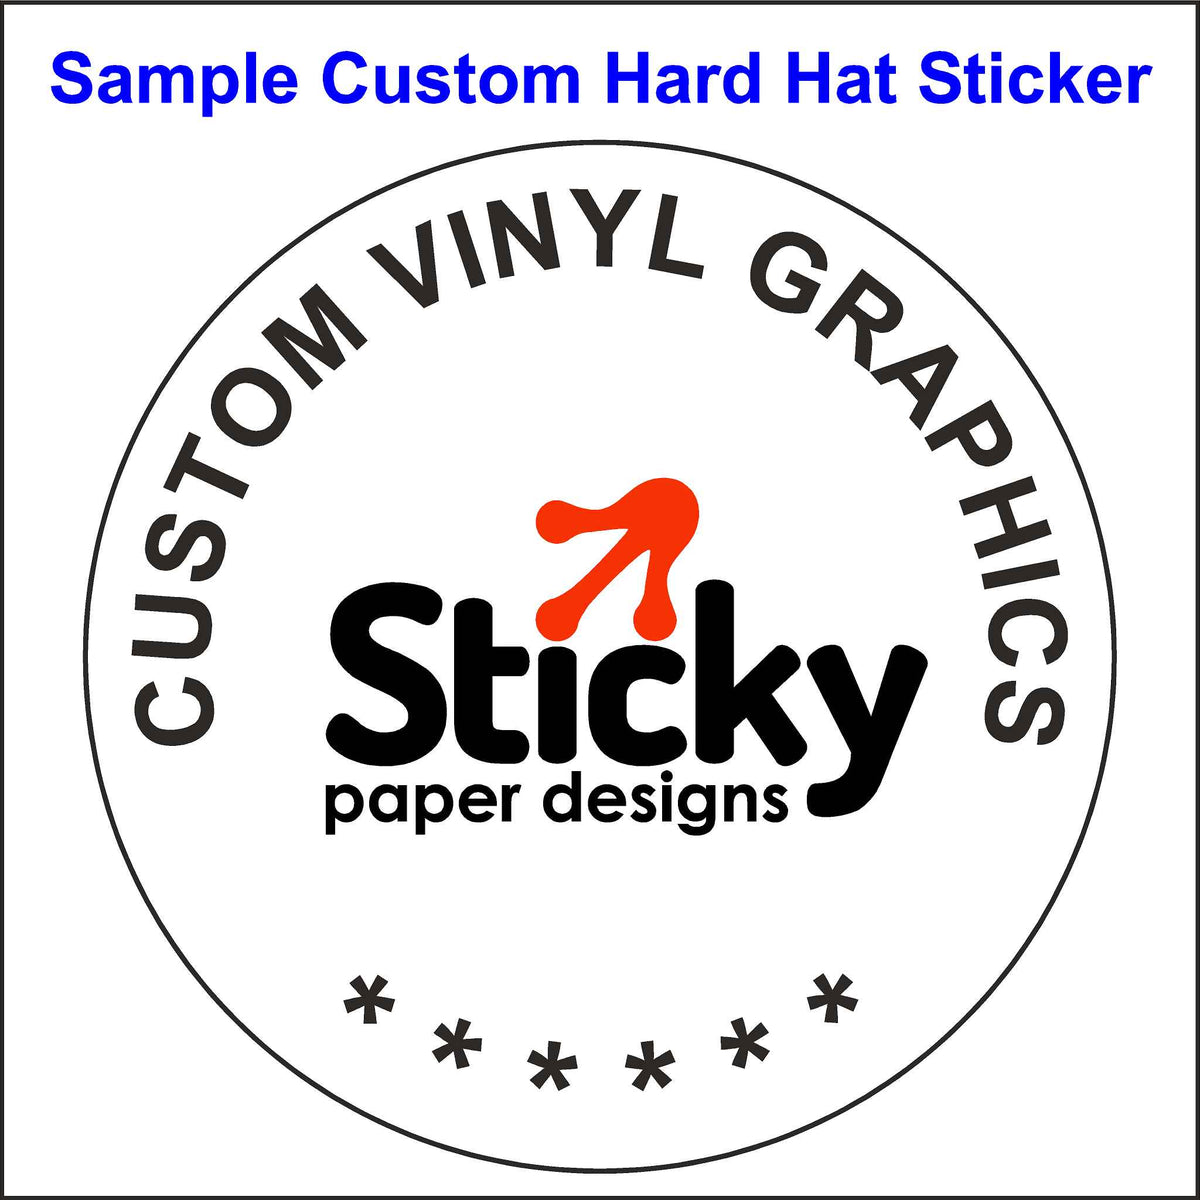 Custom Sticker For Hard Hats Printed Wit A Company Logo and tag Line. Full Color Image.